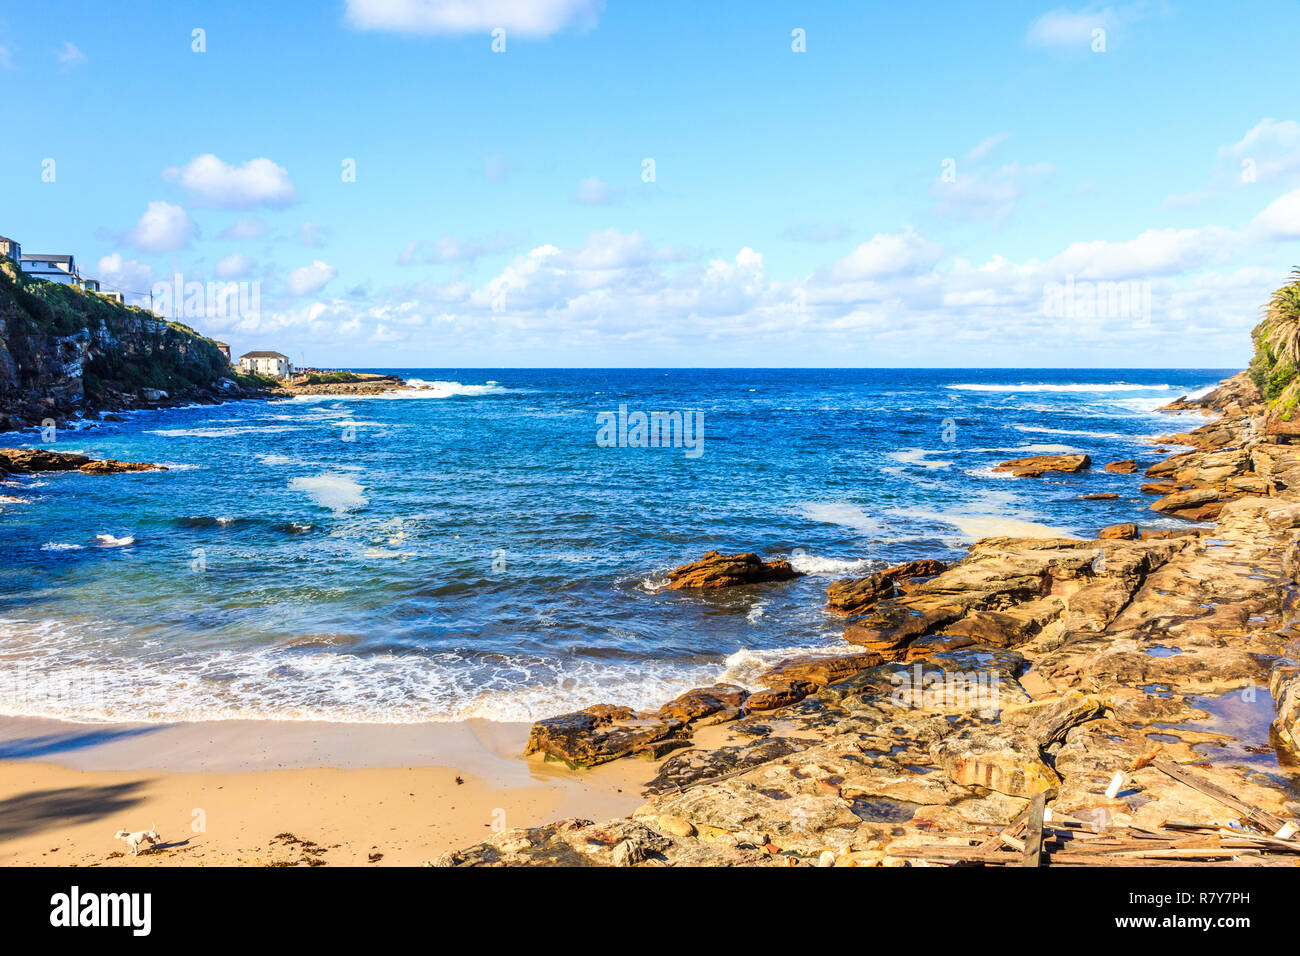 Looking out to sea on a beautiful day at Gordons Bay, New South Wales, Australia Stock Photo